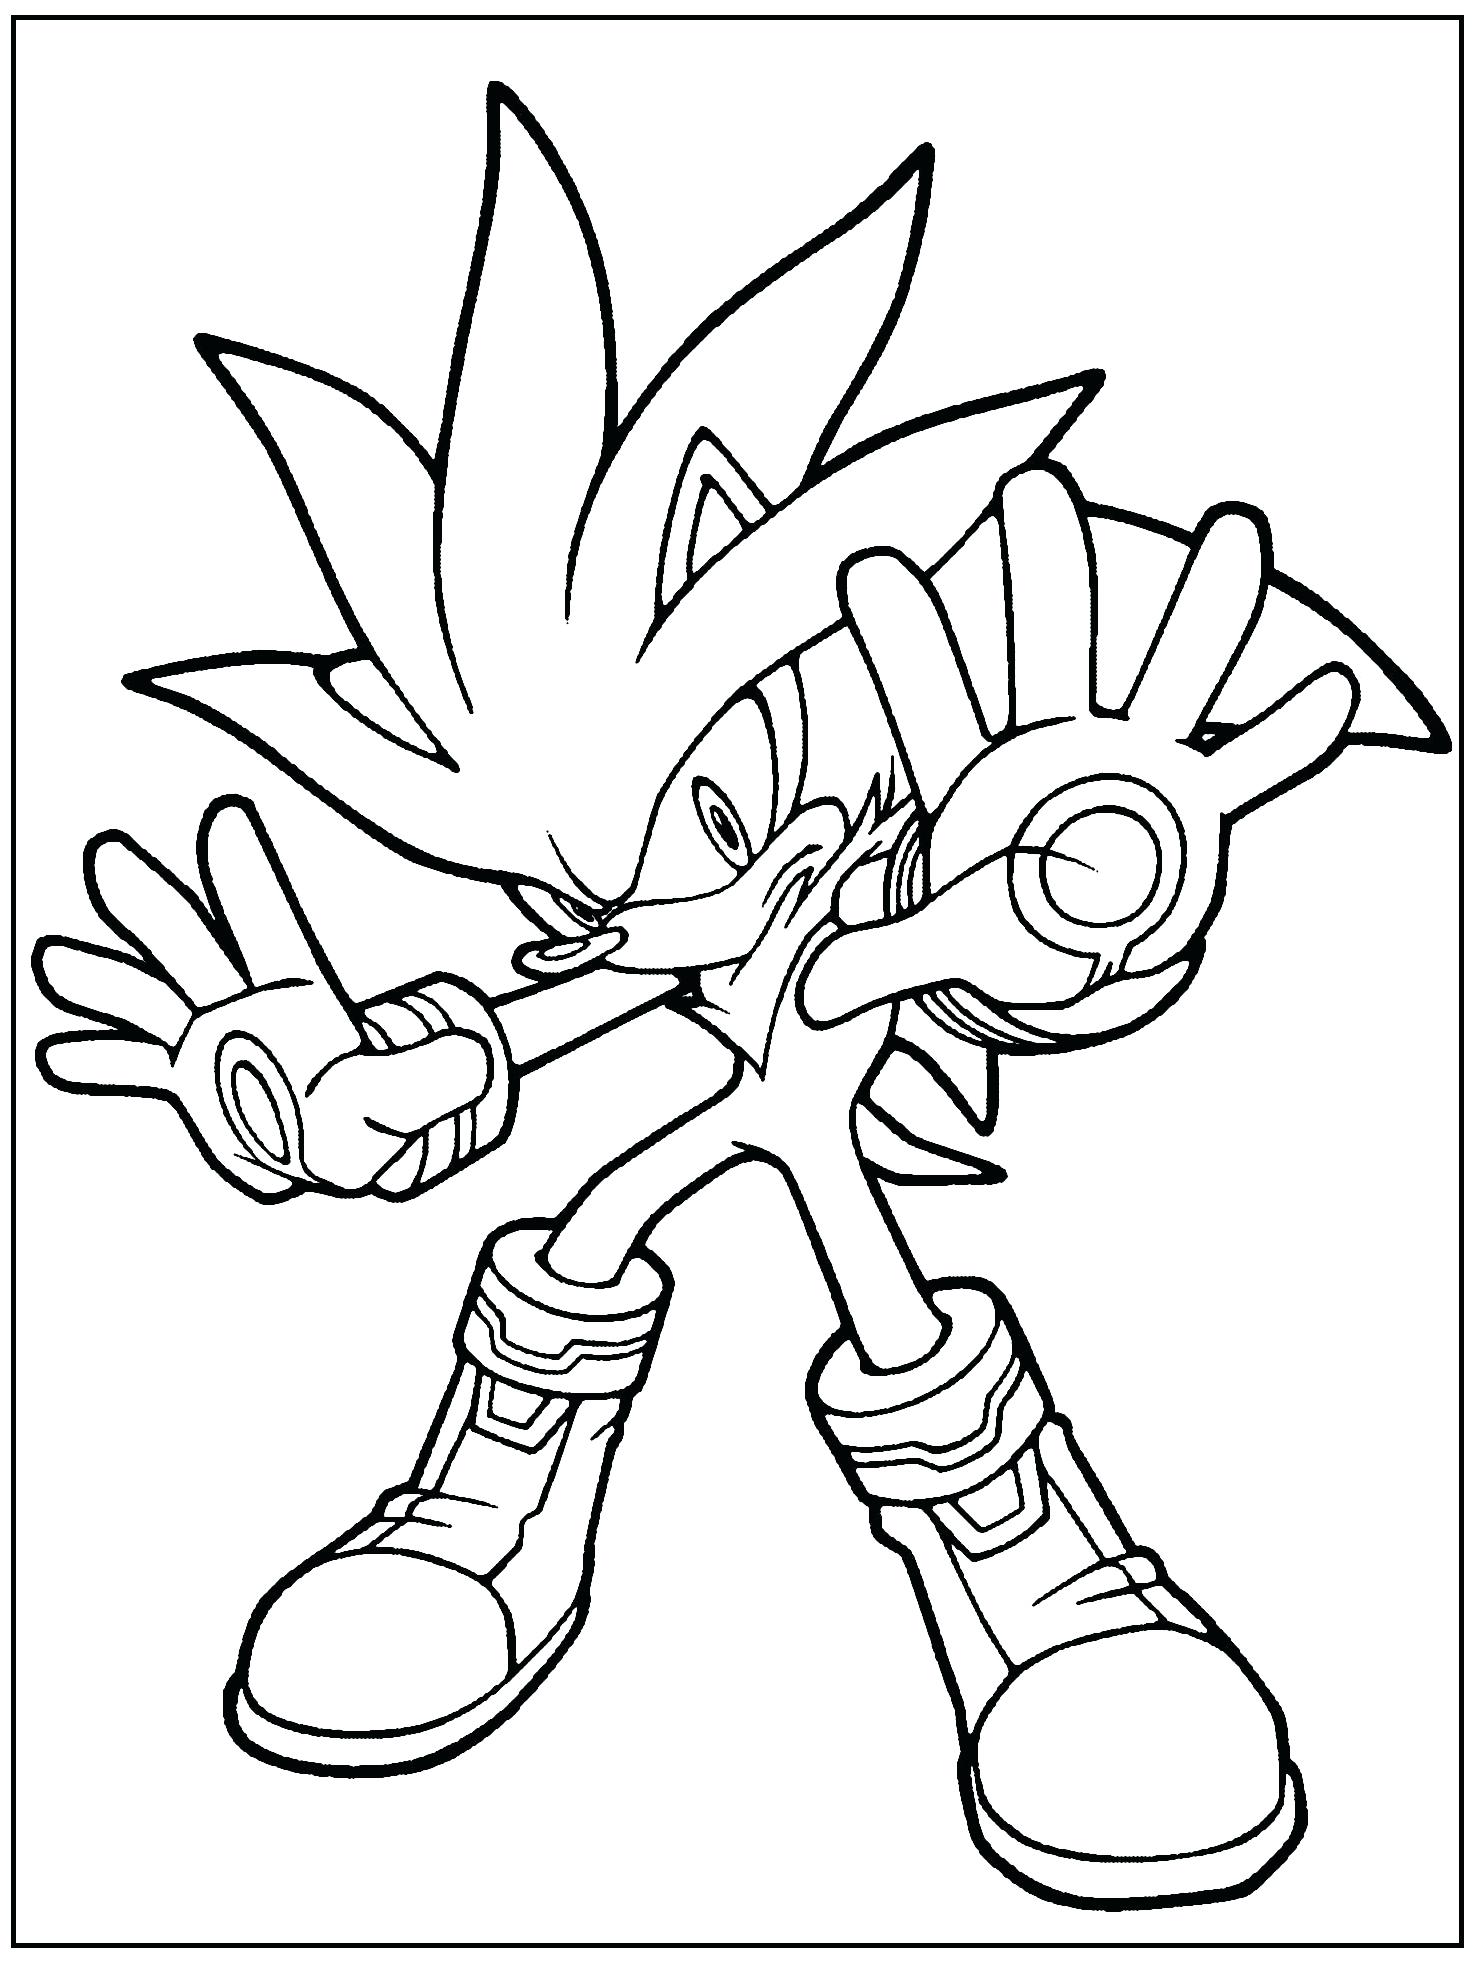 Knuckles The Echidna Coloring Pages at GetDrawings Free download